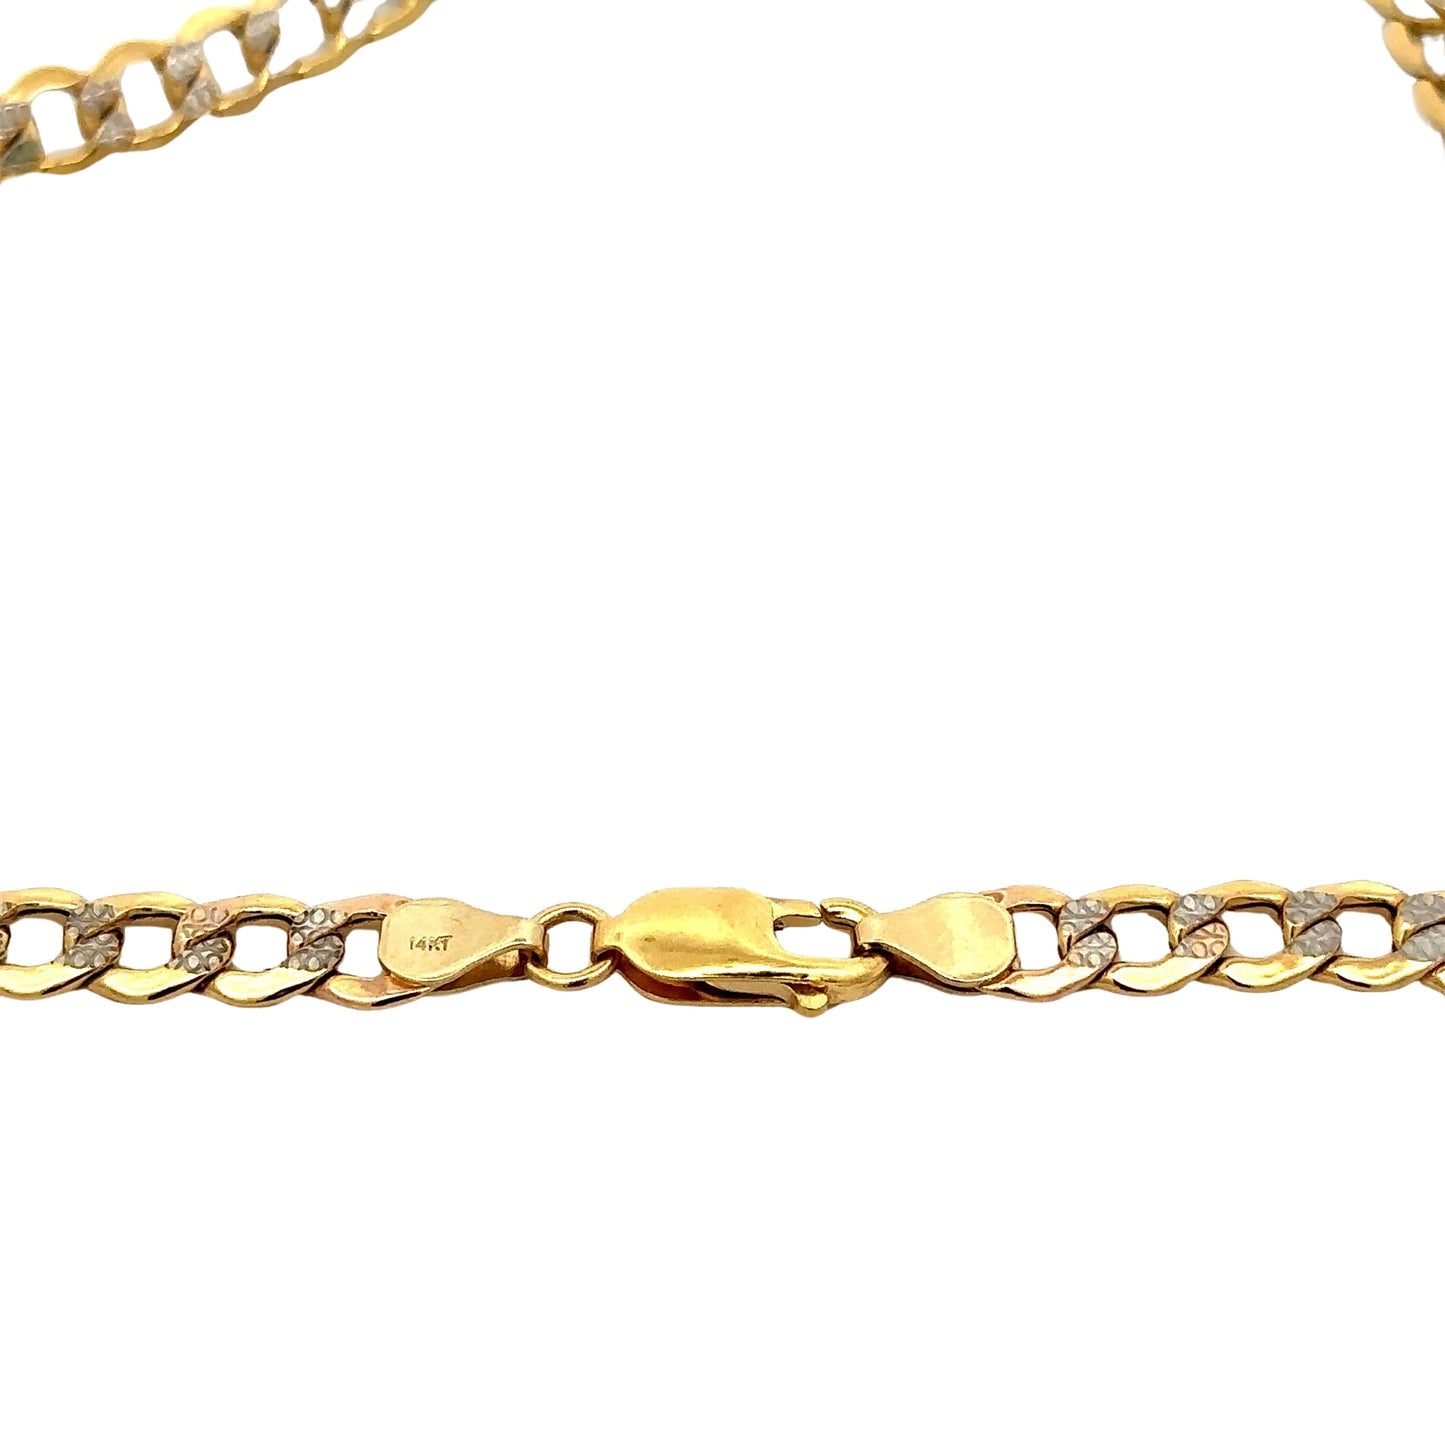 14K yellow gold Lobster clasp with scratches on gold